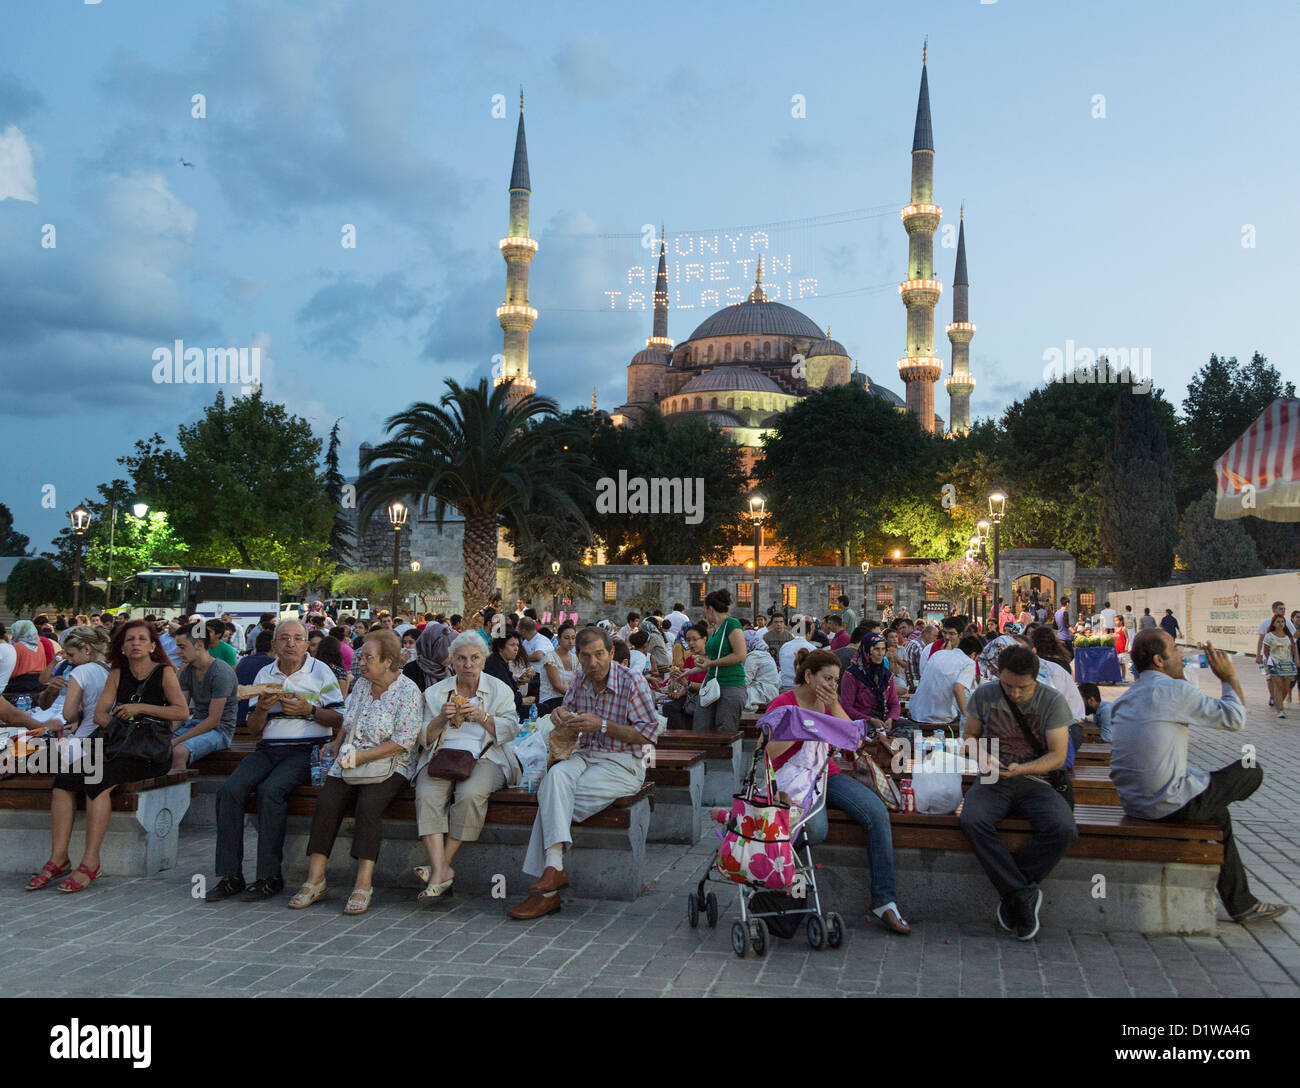 Muslims during Ramadan picnicking at a park at Sultan Ahmet district, Istanbul, Turkey Stock Photo